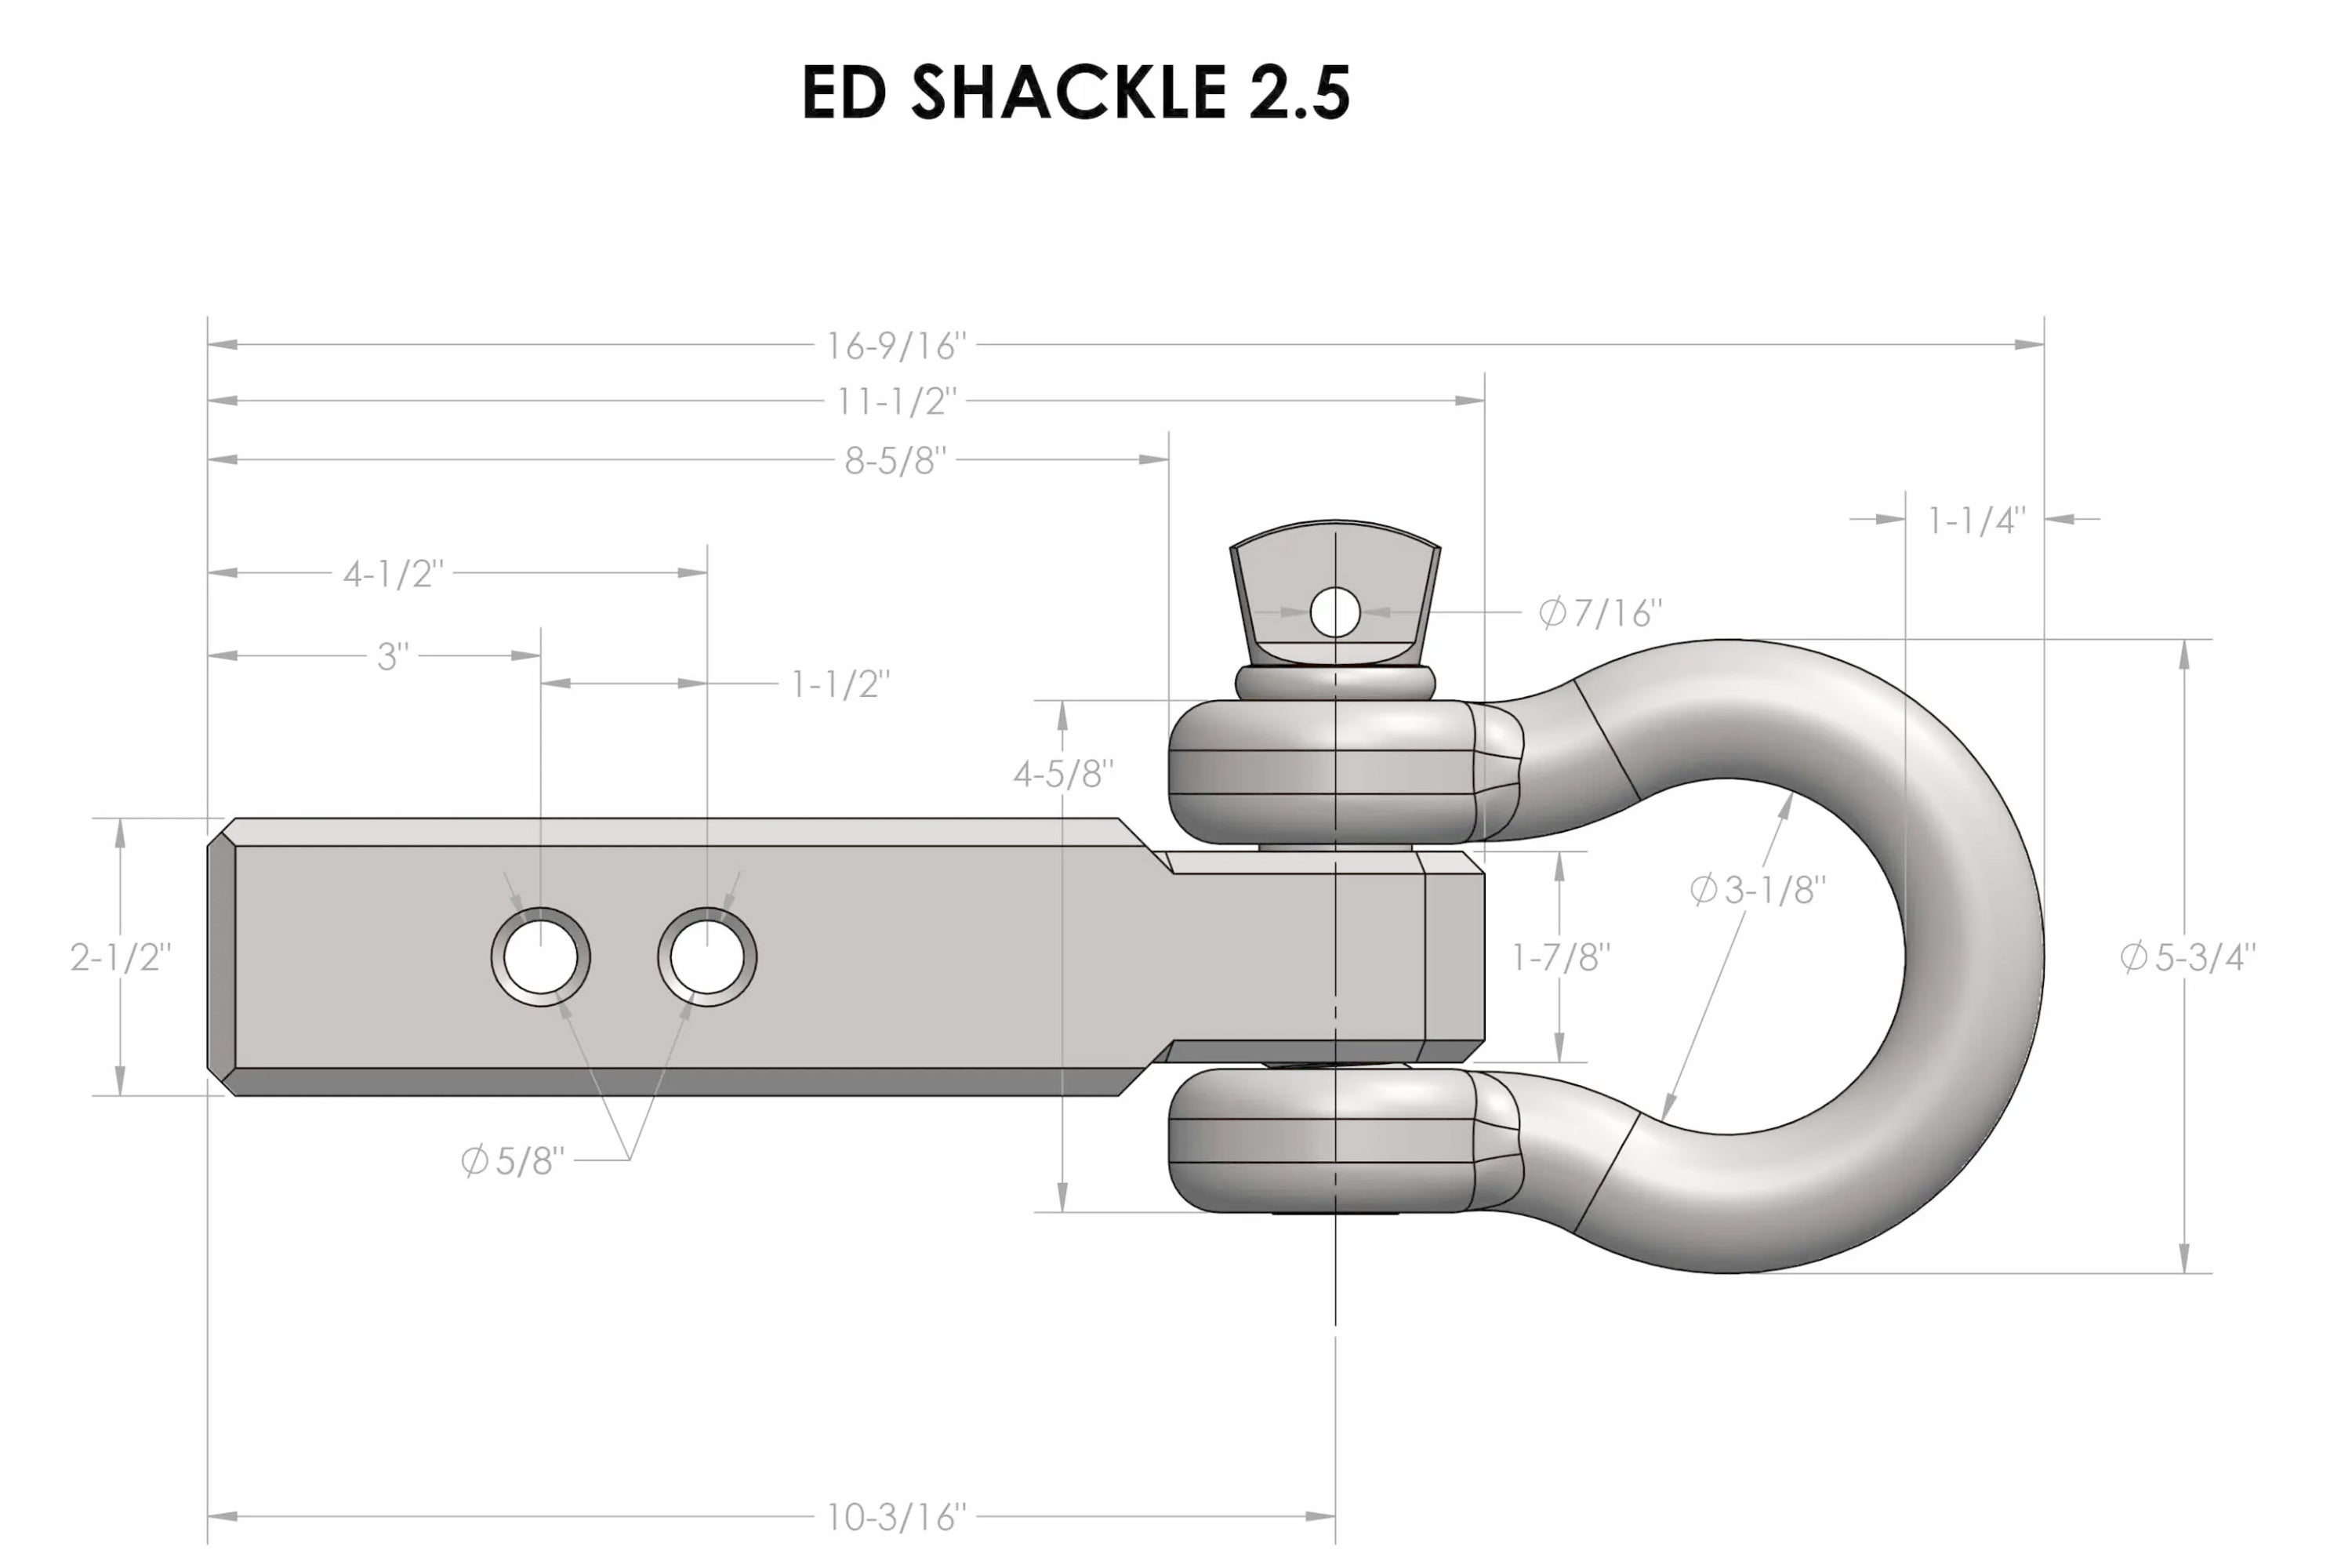 BulletProof 2.5" Extreme Duty Receiver Shackle - Image 1 of 24